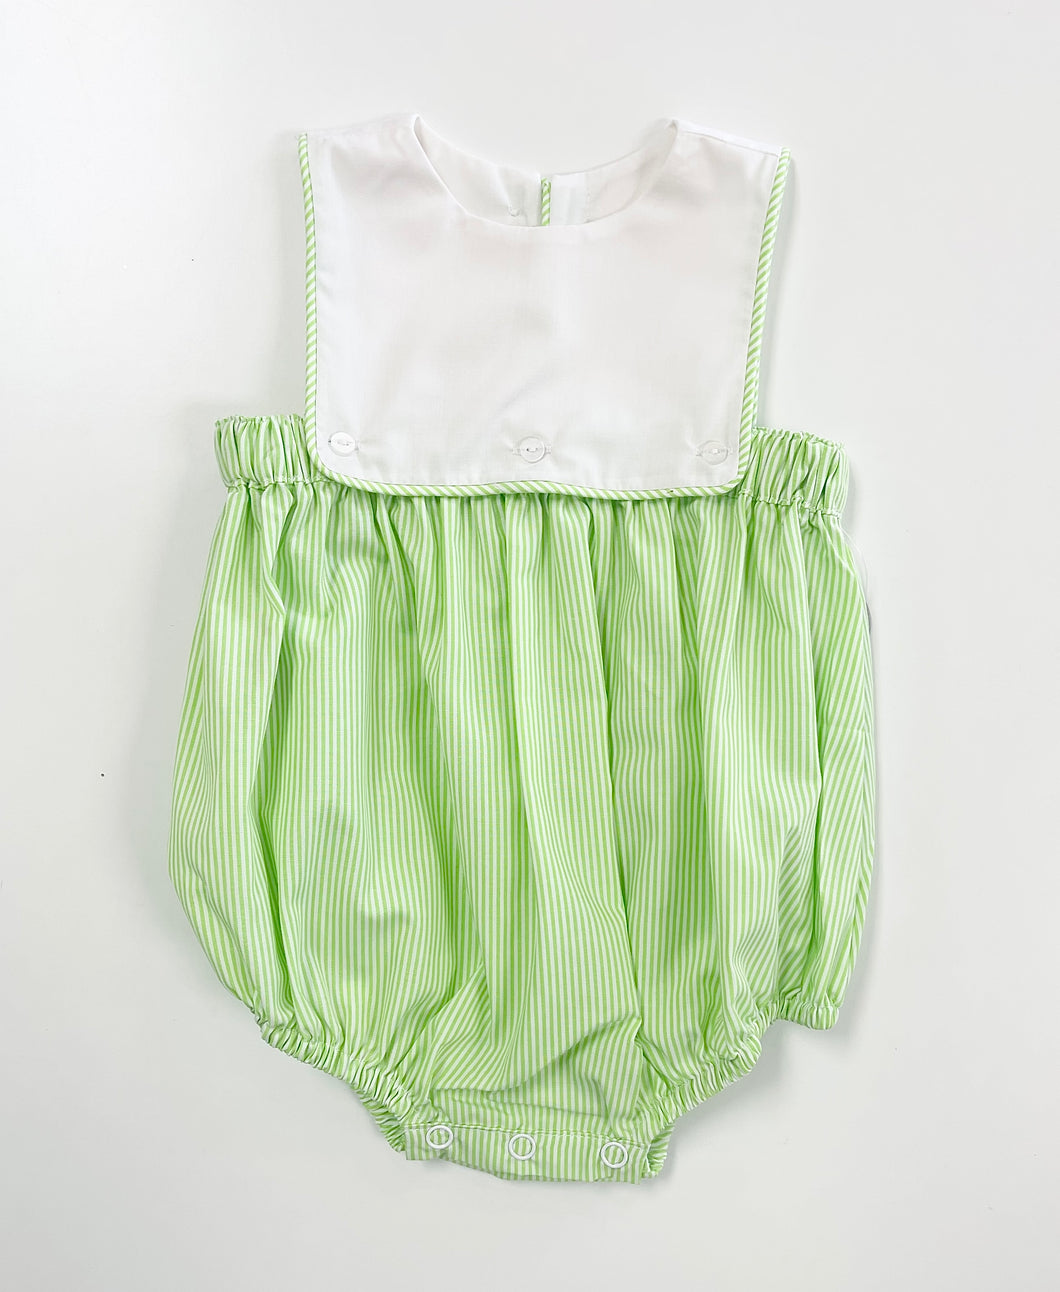 Boys Lime Green Nicky Bubble